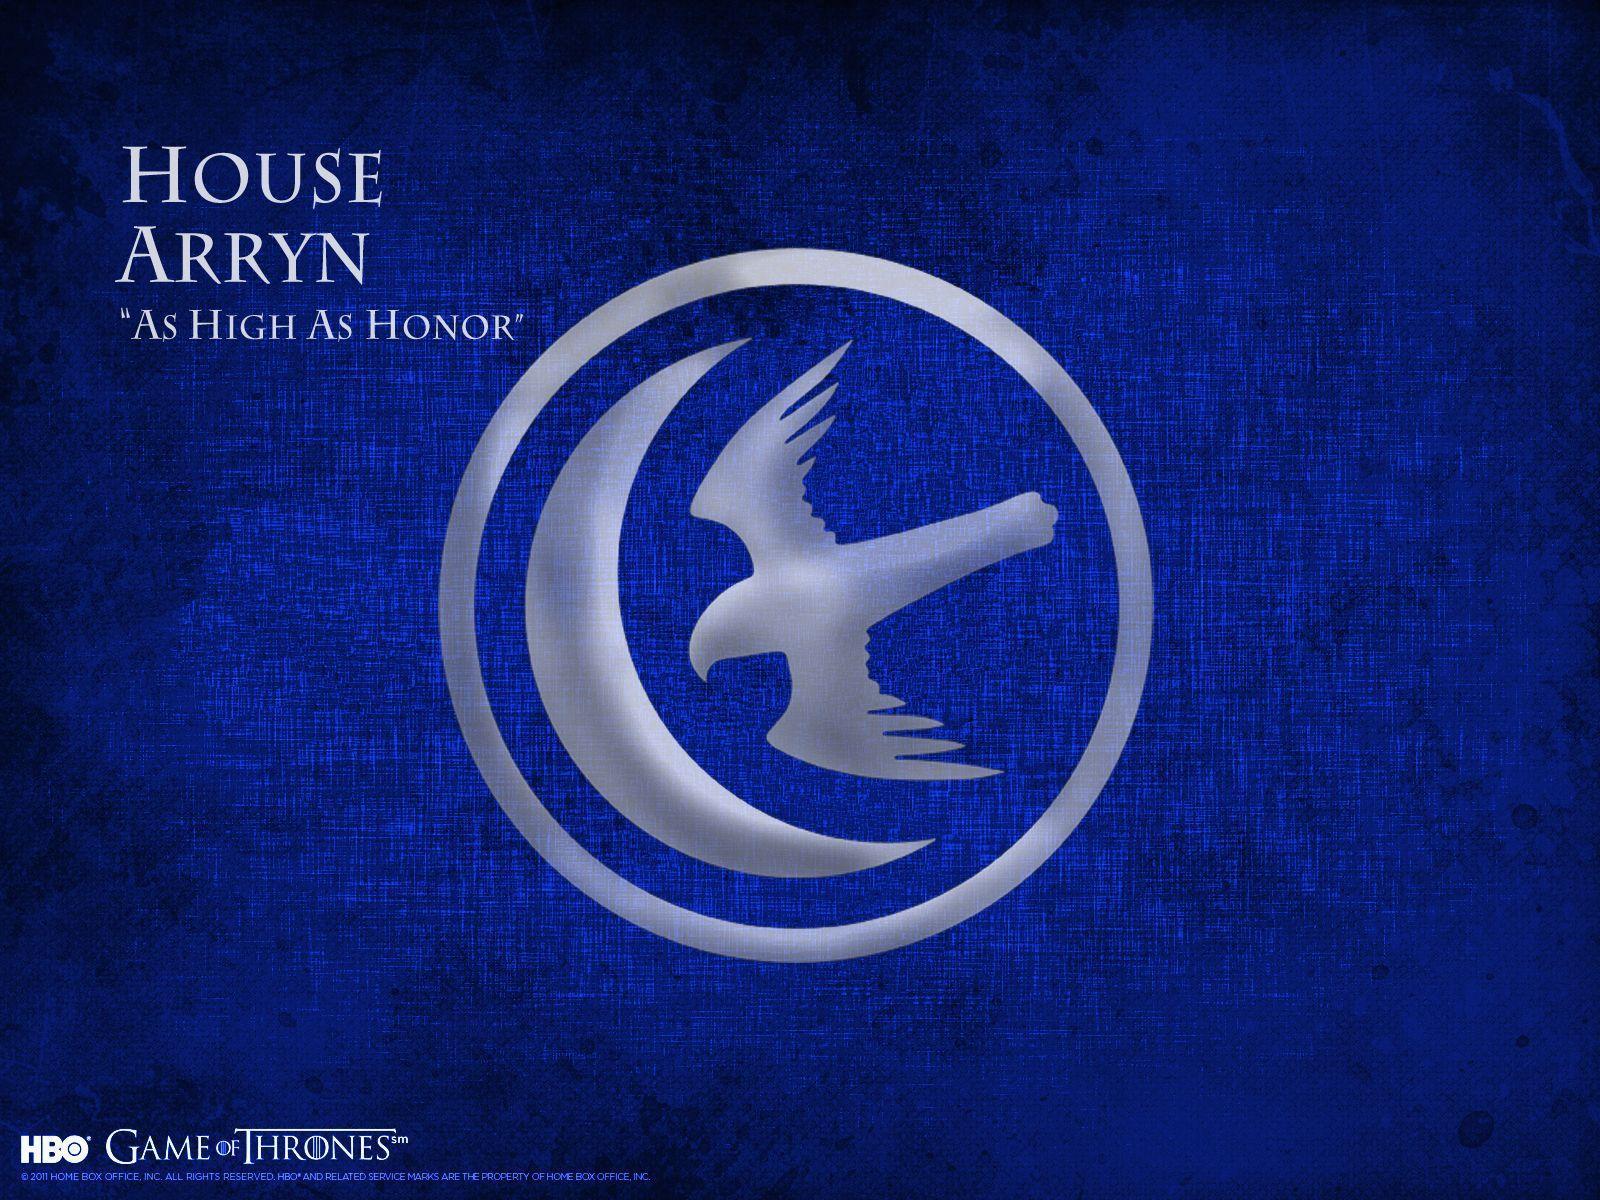 House Arryn. When you play a game of thrones you win or you die